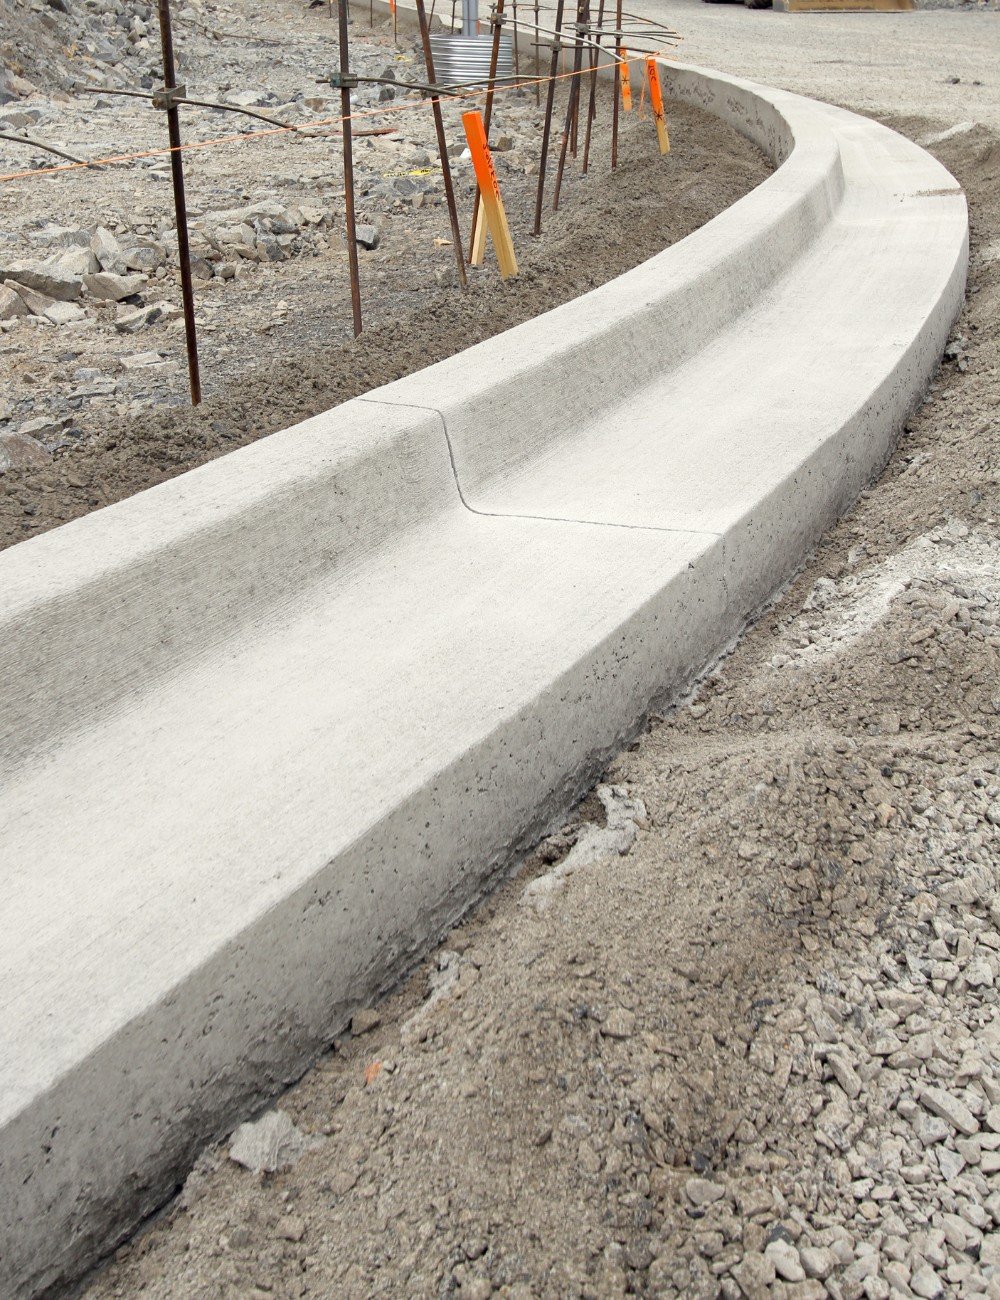 An under-construction site in Palm Beach County features a newly laid concrete curb with a smooth, rounded edge. The surrounding ground is covered with loose gravel and rocks. Rebar sticks out vertically behind the curb, indicating ongoing construction work involving decorative concrete designs.